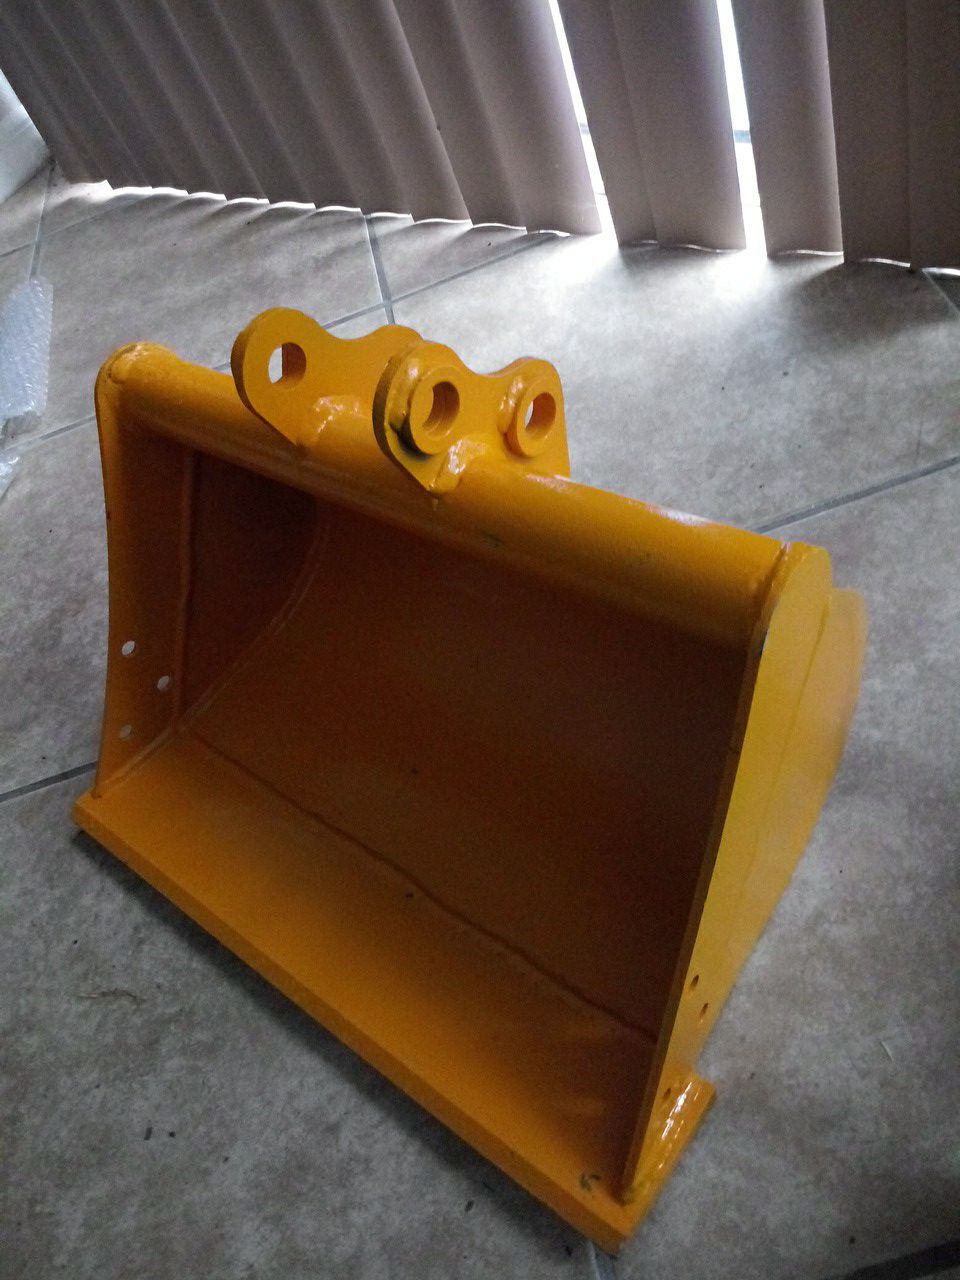 Bucket for mini Excavator Hydraulic size 20" more size can be sent if requested